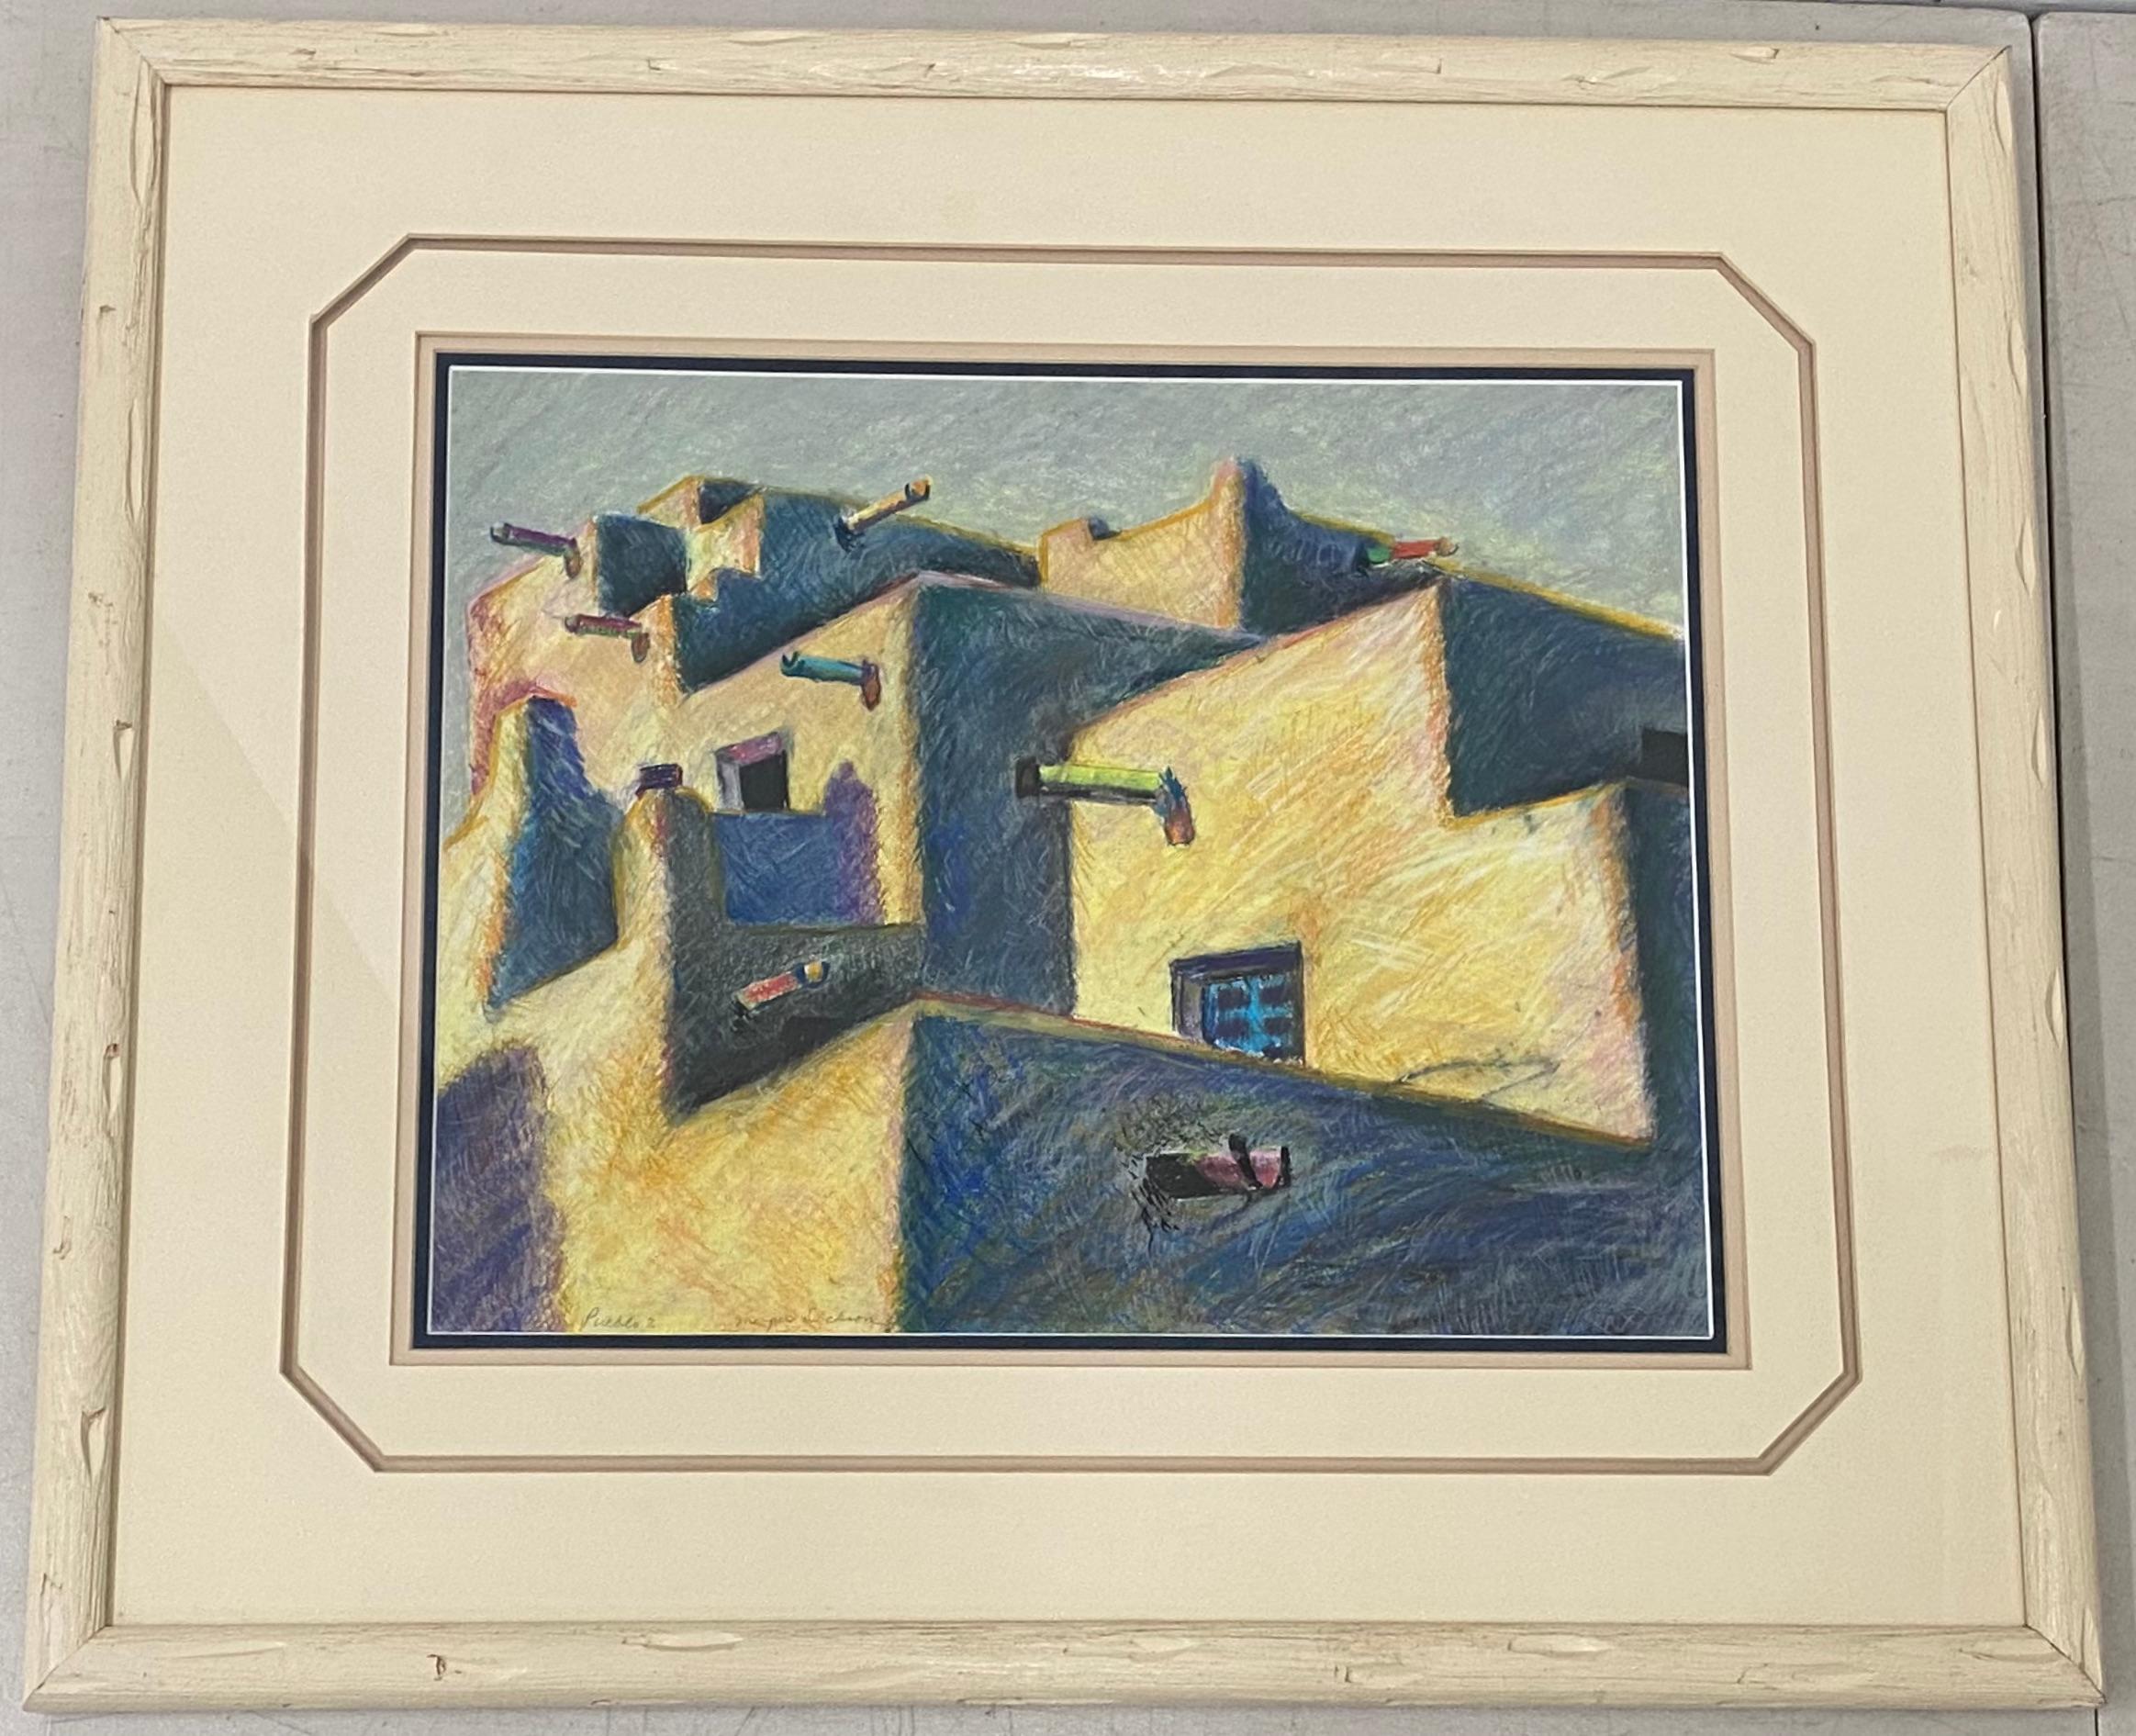 Margie Dickson "Pueblo 2" Original Pastel on Paper 20th Century

Dimensions 18.5" wide x 14.5" high

The frame measures 29.25" wide x 25.25" high

Signed and titled lower left

Good vintage condition 